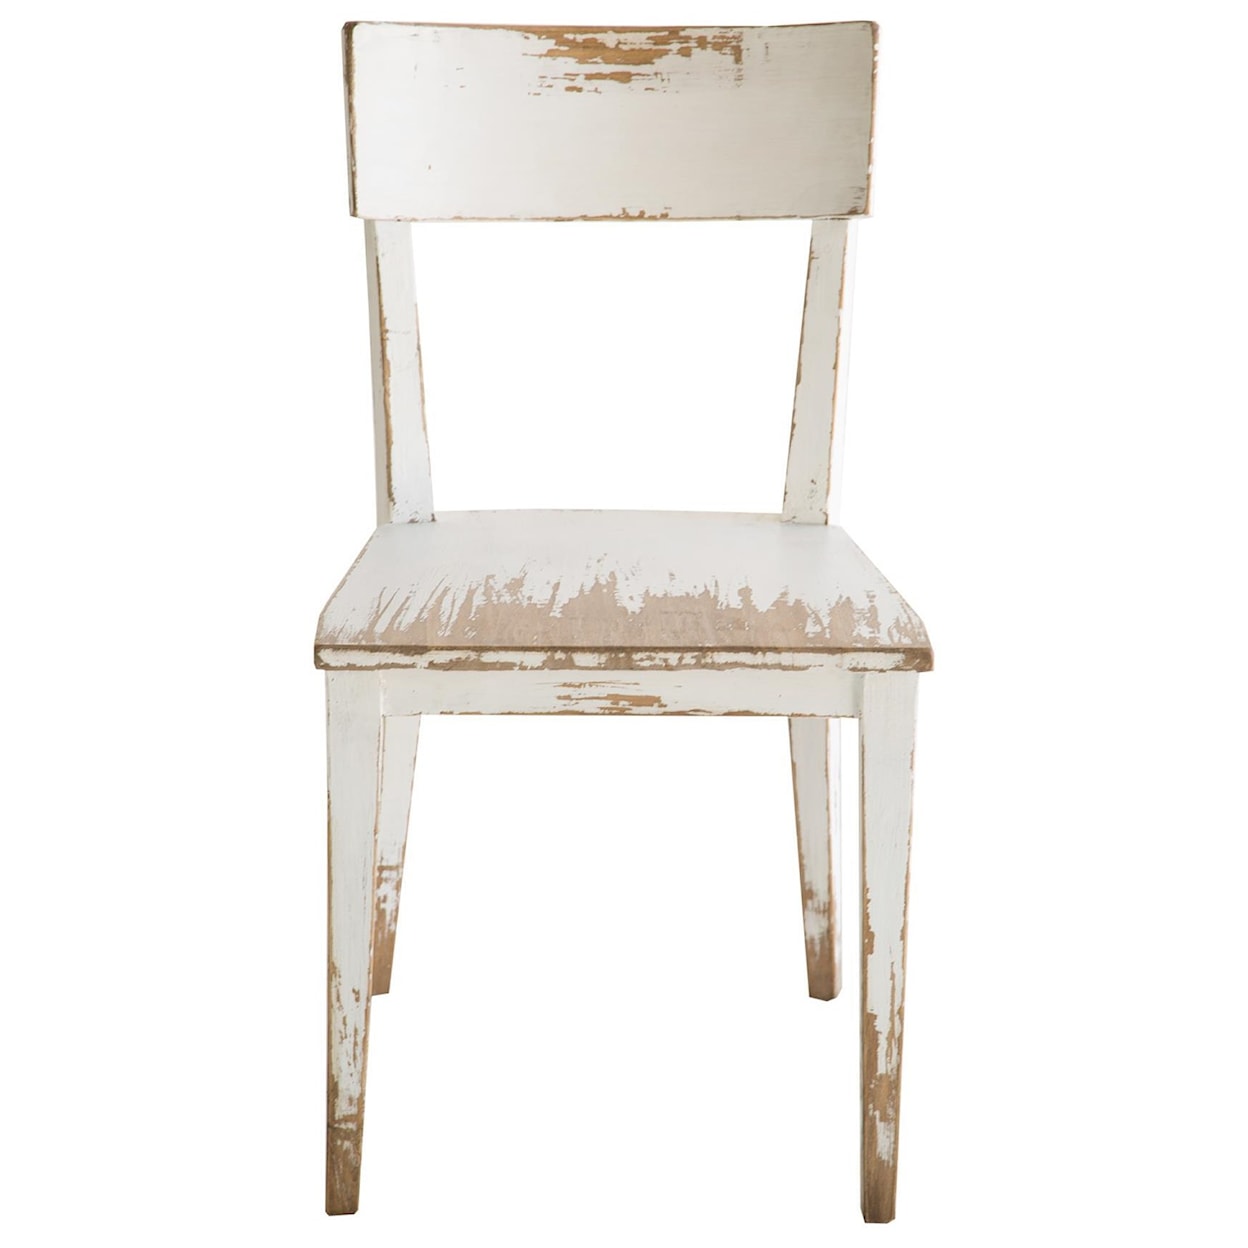 EAGLE INDUSTRIES Molly Molly Dining Chair Antique White